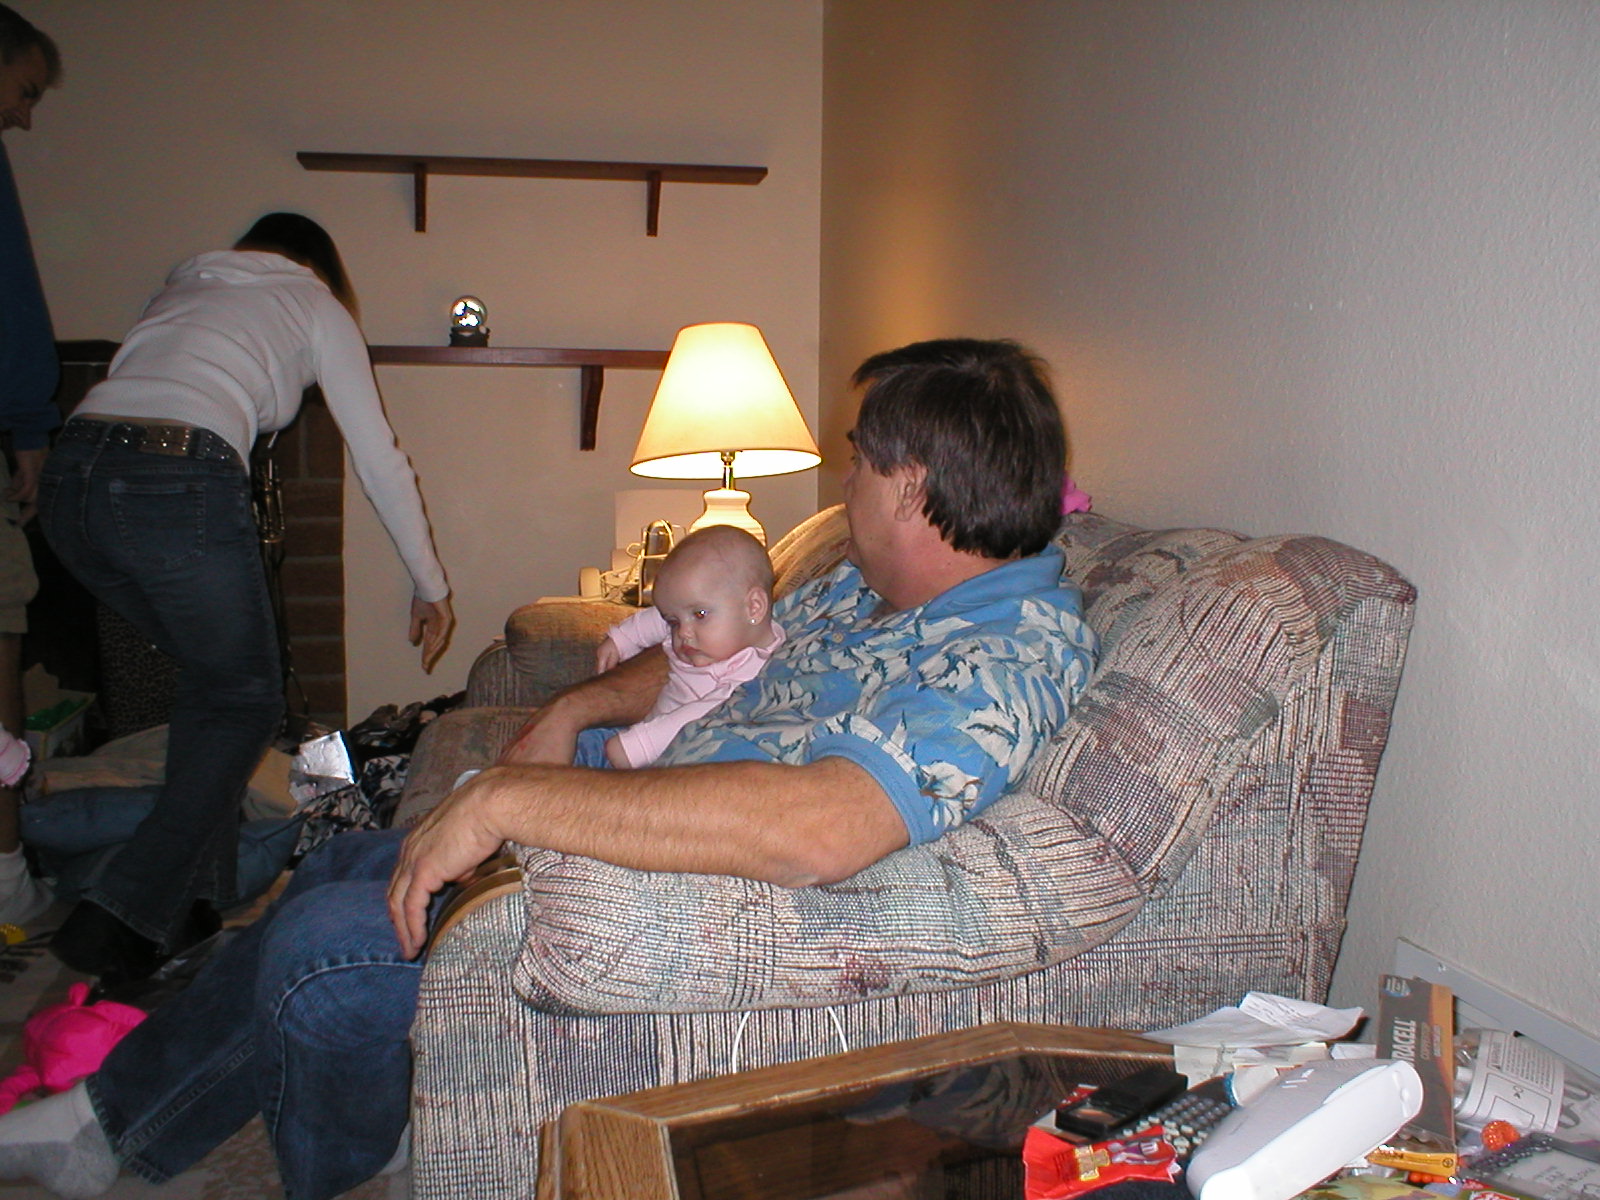 Grandpa Dave & Kaylin.  Momma is chasing after Paige who is stuck between the couch and the table.